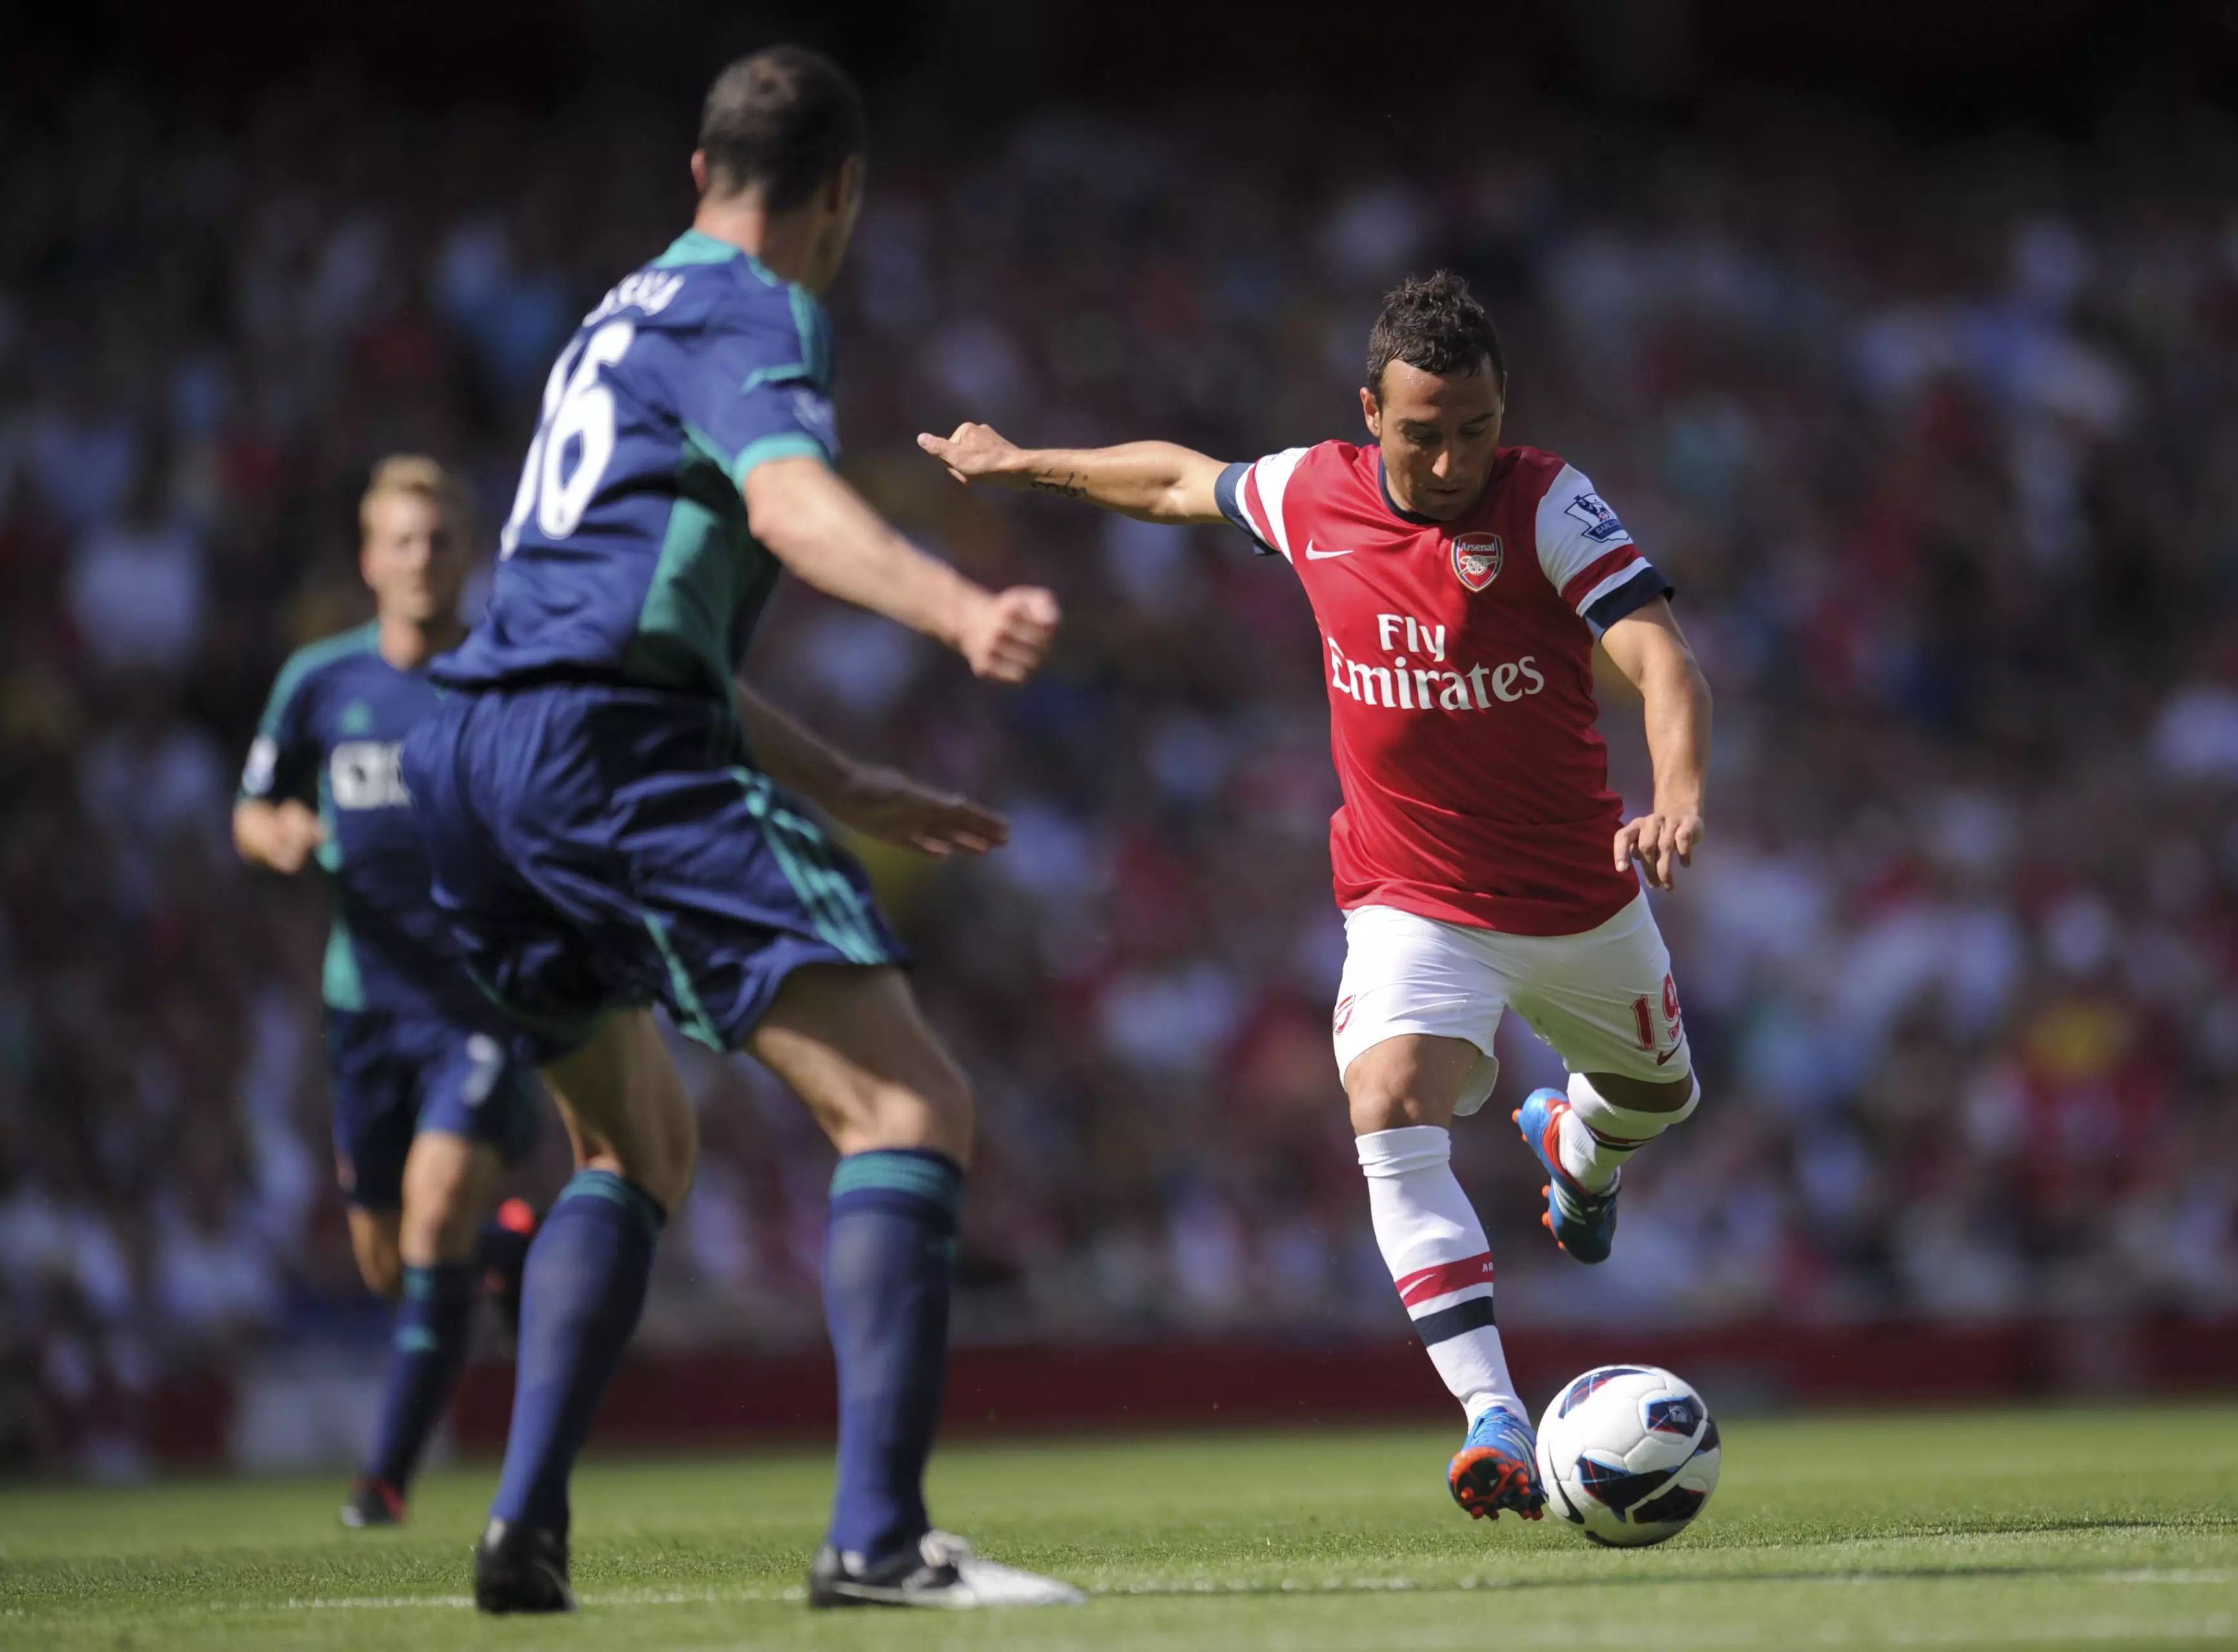 Cazorla pulling the strings for Arsenal. Image: PA Images